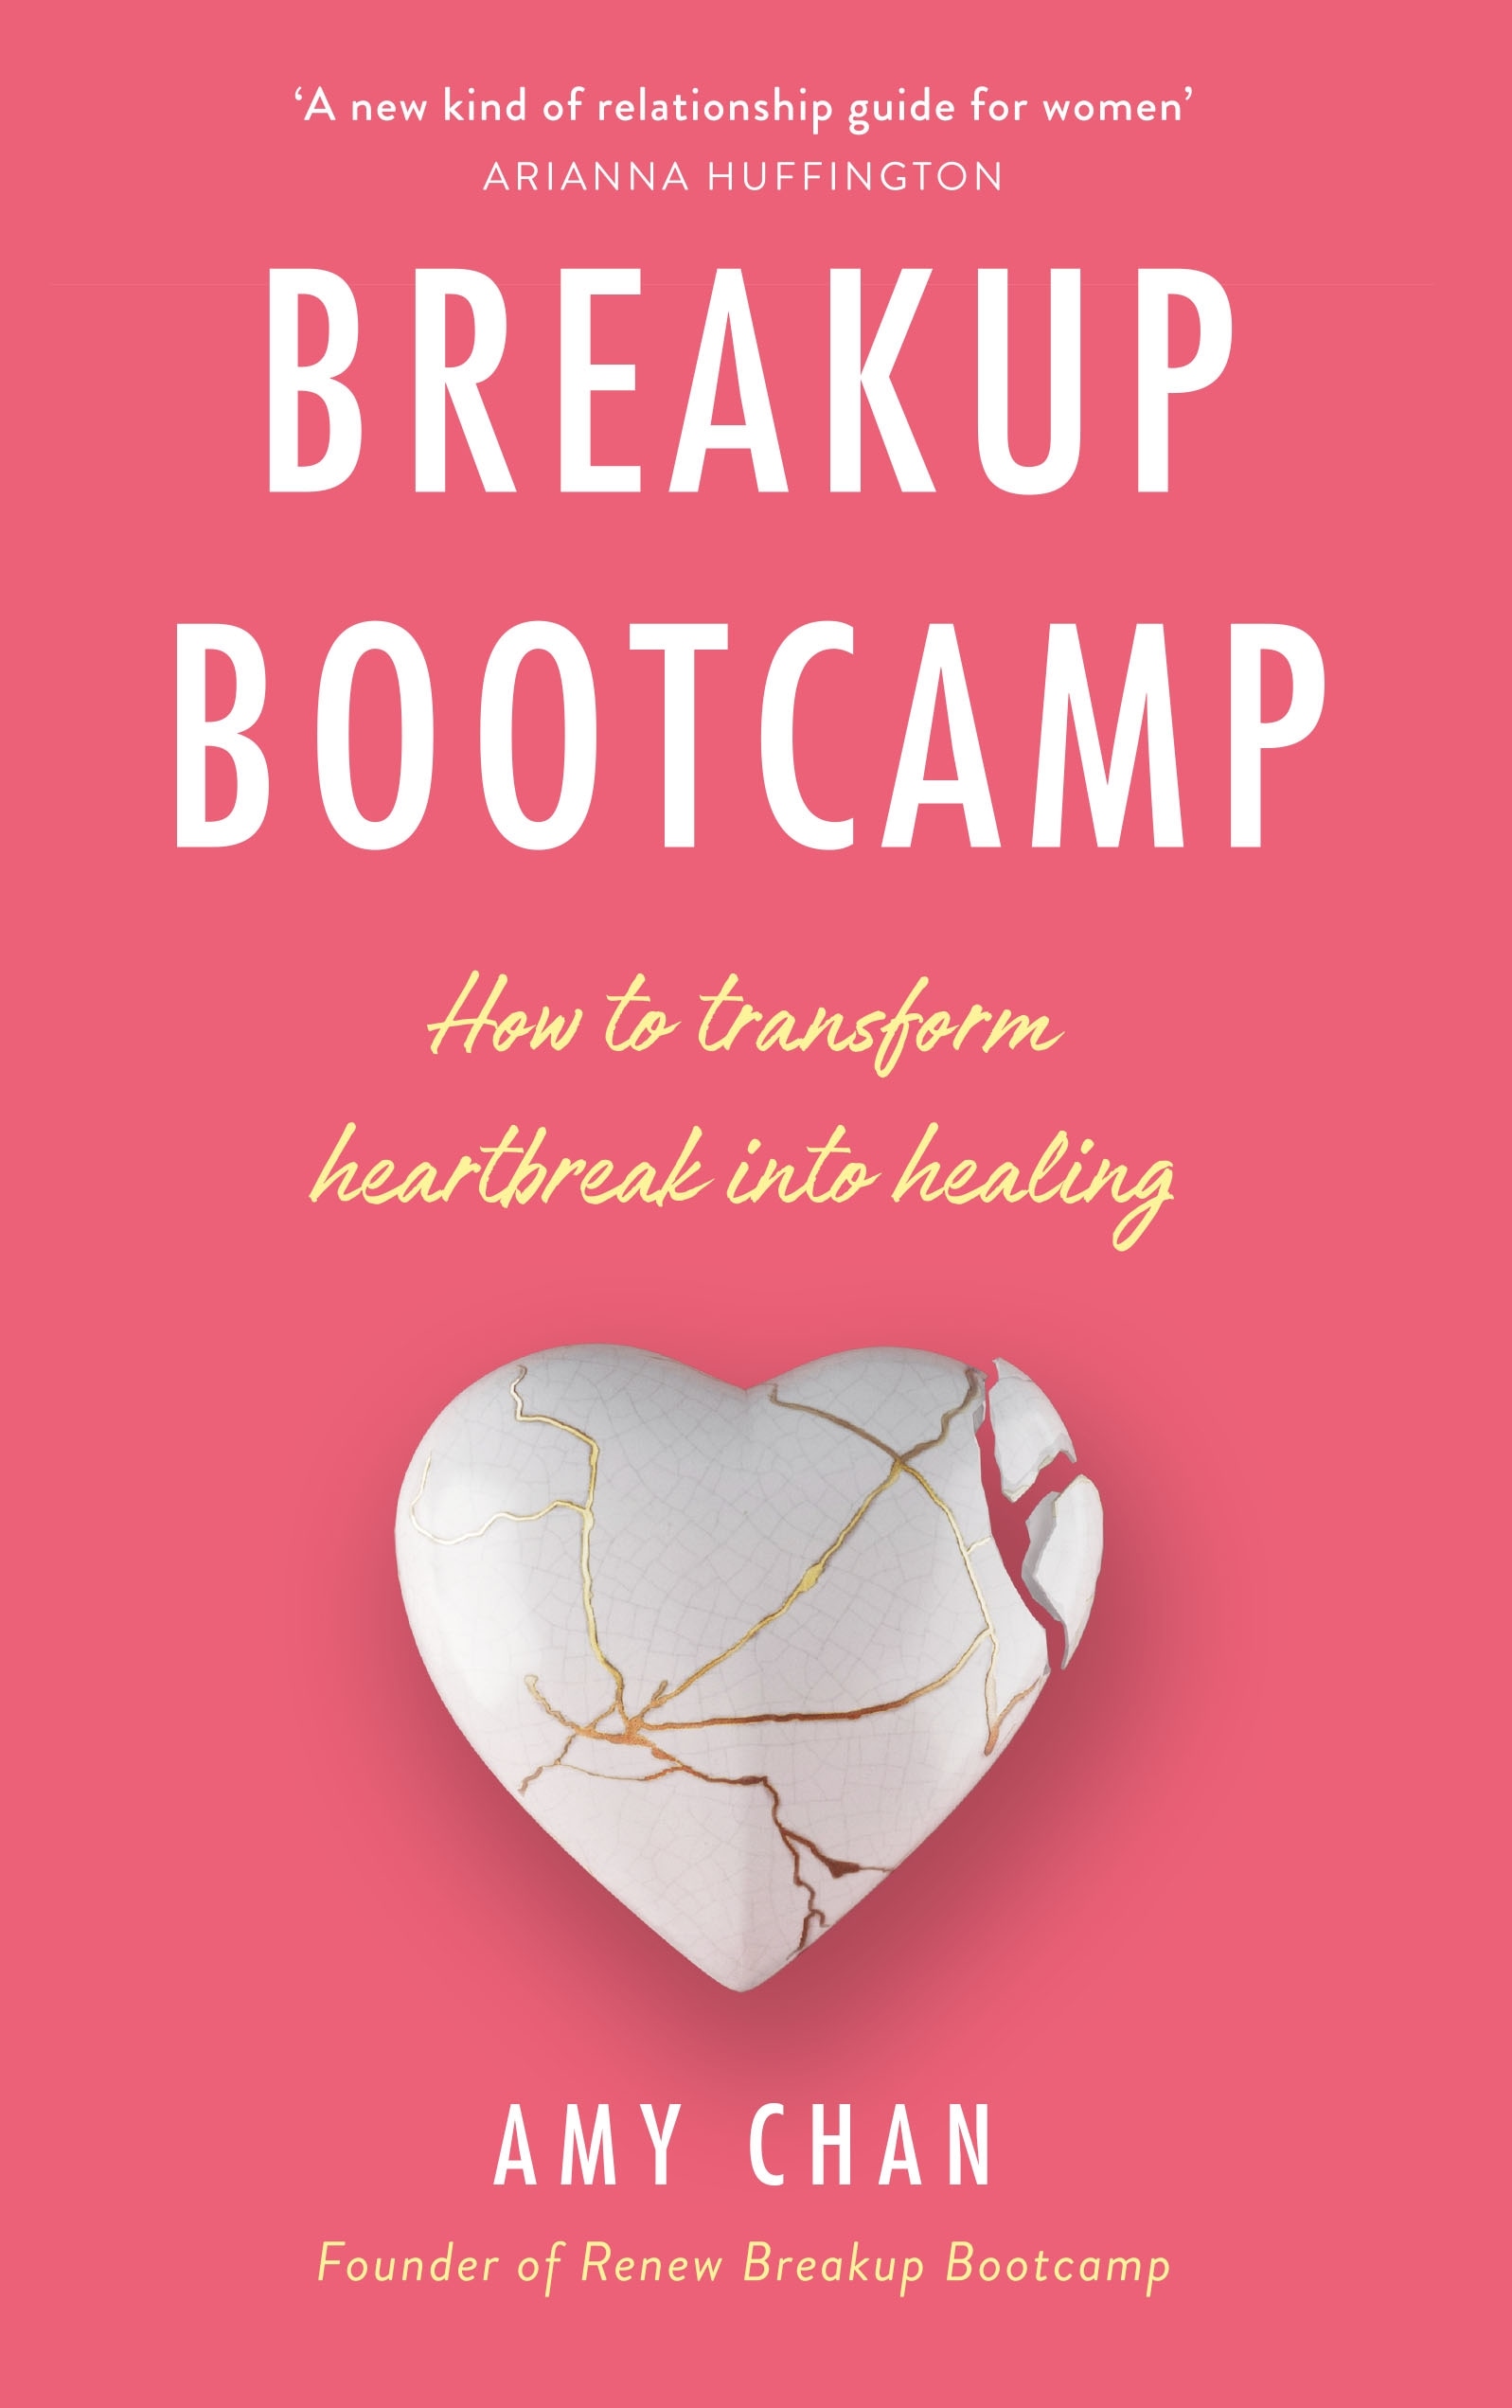 Book “Breakup Bootcamp” by Amy Chan — December 3, 2020